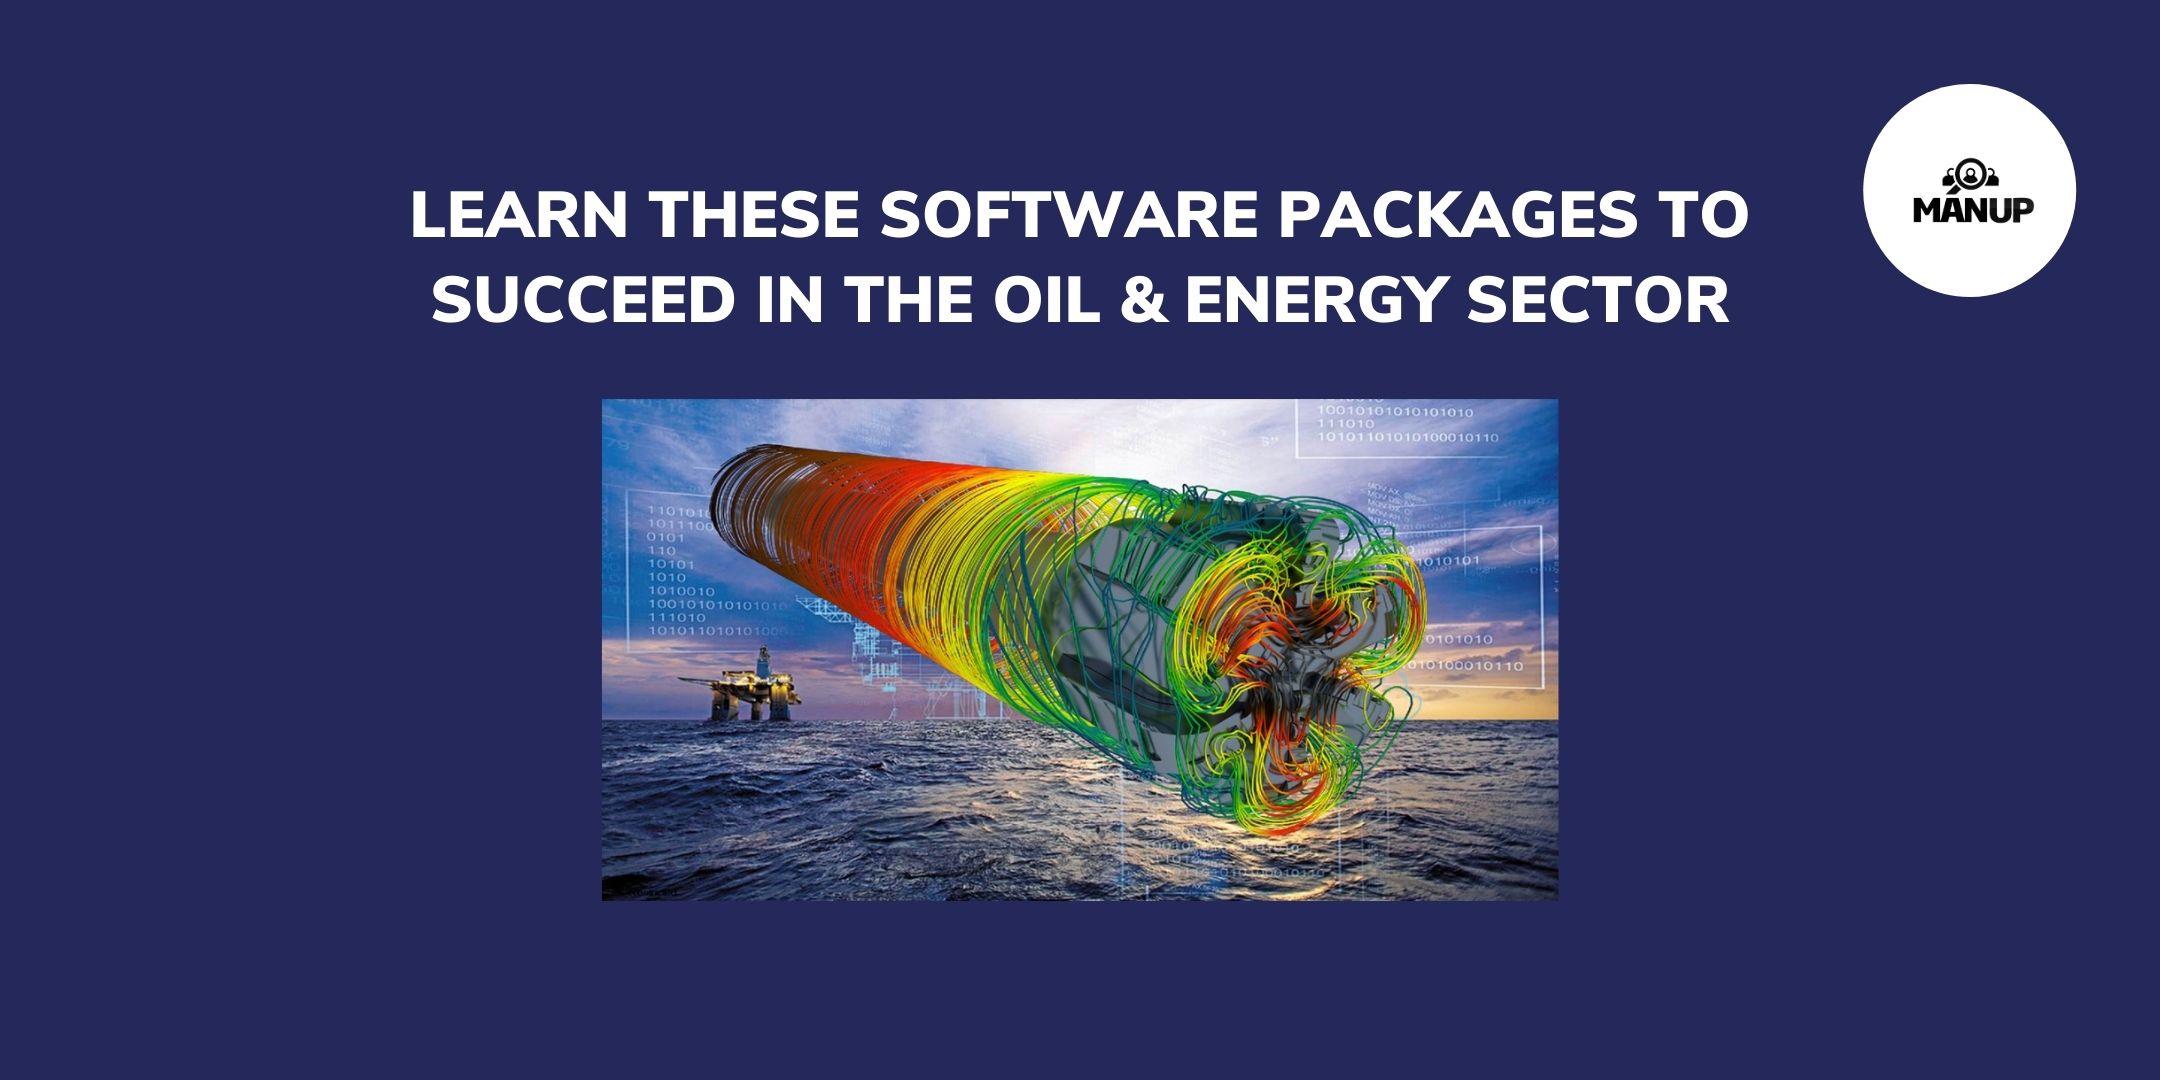 49c1eb4ae29ca0615b44cb9e35e6675d1974.Learn-These-Software-Packages-To-Succeed-in-the-Oil-&-Energy-Sector.jpg